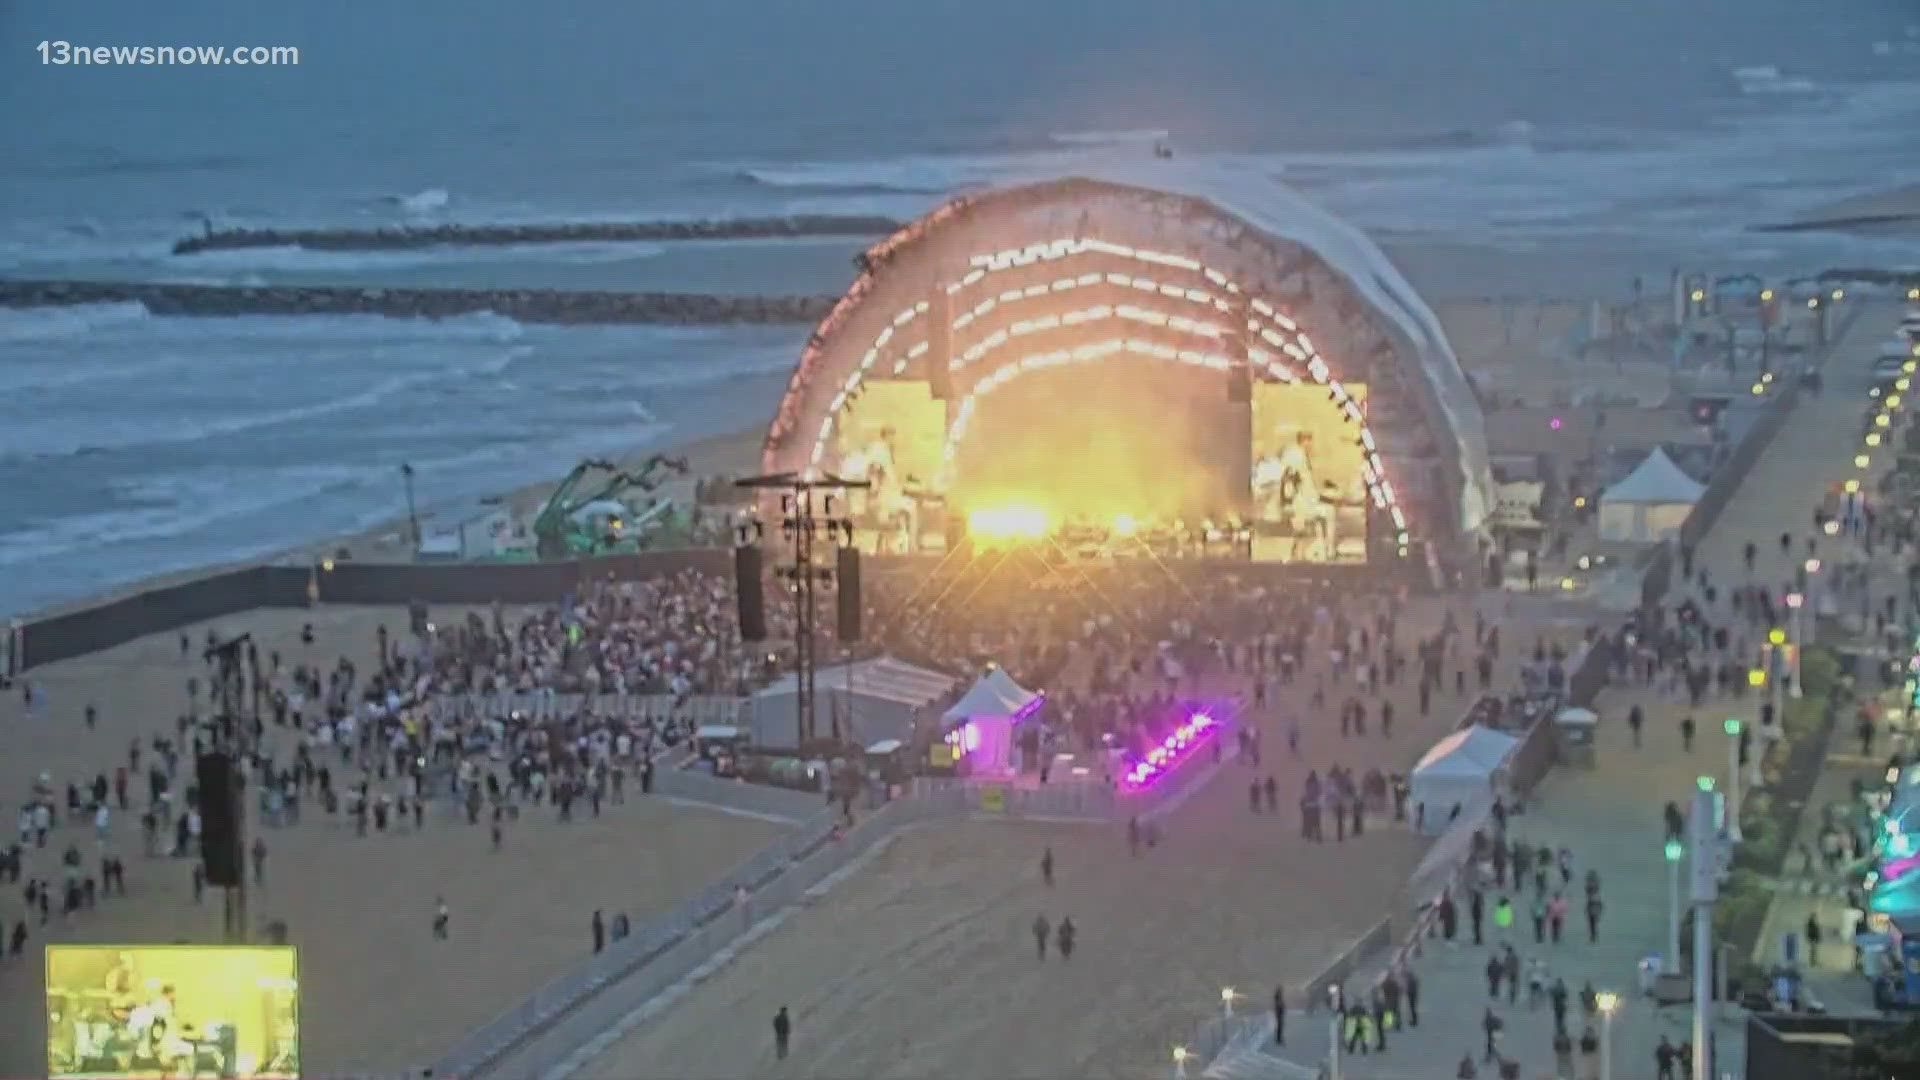 Virginia Beach City Council is expected to vote on Audacy's proposal to hold a 3-day pop rock festival. The city would set aside $750,000 for the festival.